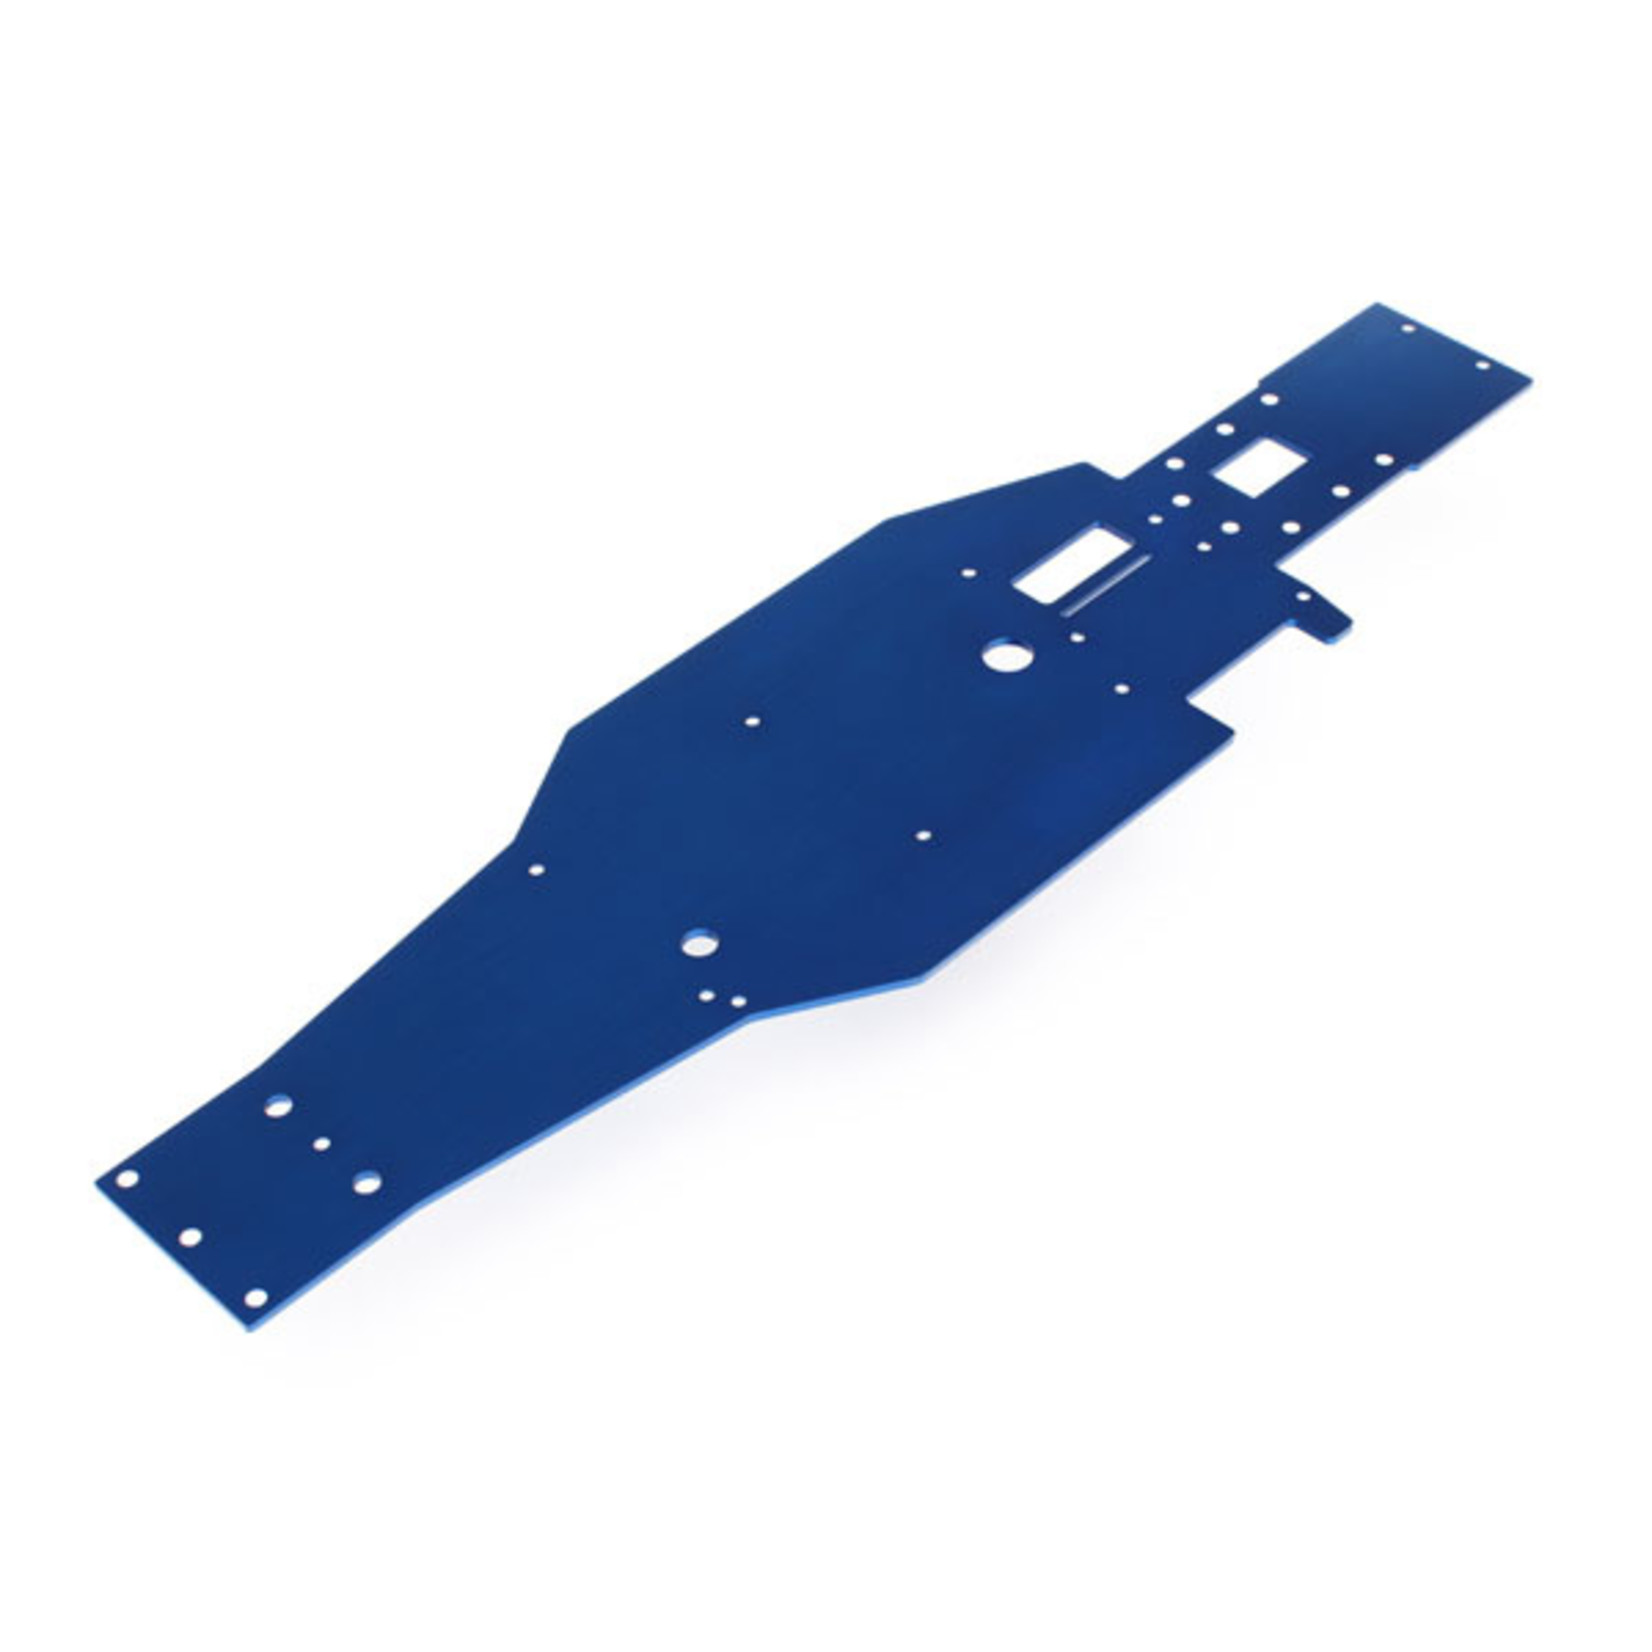 Traxxas 4422 - Chassis, lower (blue-anodized, T6 aluminum)